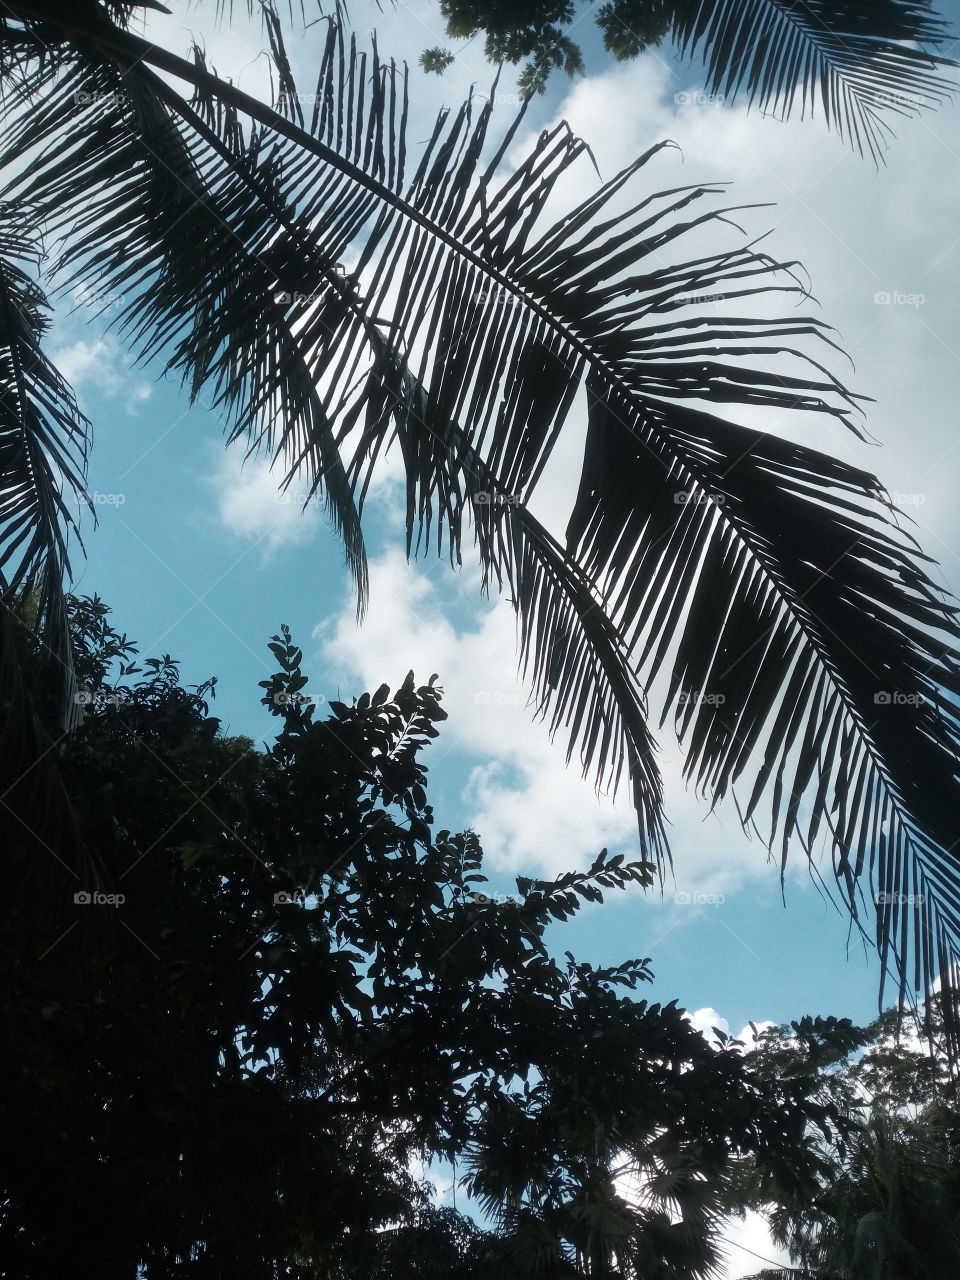 This is a picture which is captured by me beside my house. There are some coconut trees in this picture.